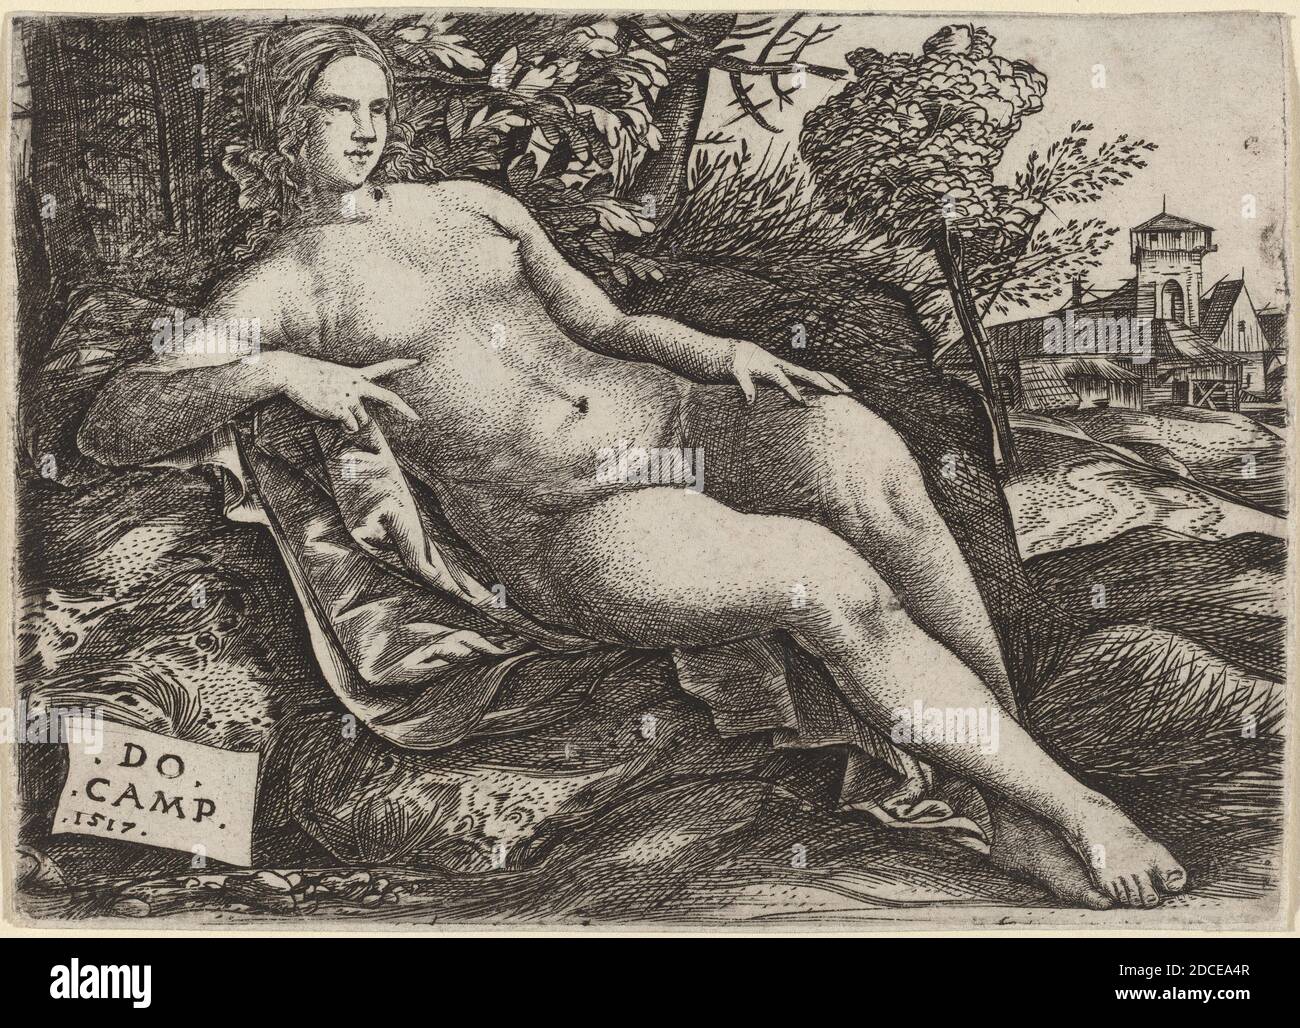 Domenico Campagnola, (artist), Venetian, before 1500 - 1564, Venus Reclining in a Landscape, 1517, engraving, sheet (trimmed to plate mark): 9.6 x 13.4 cm (3 3/4 x 5 1/4 in Stock Photo